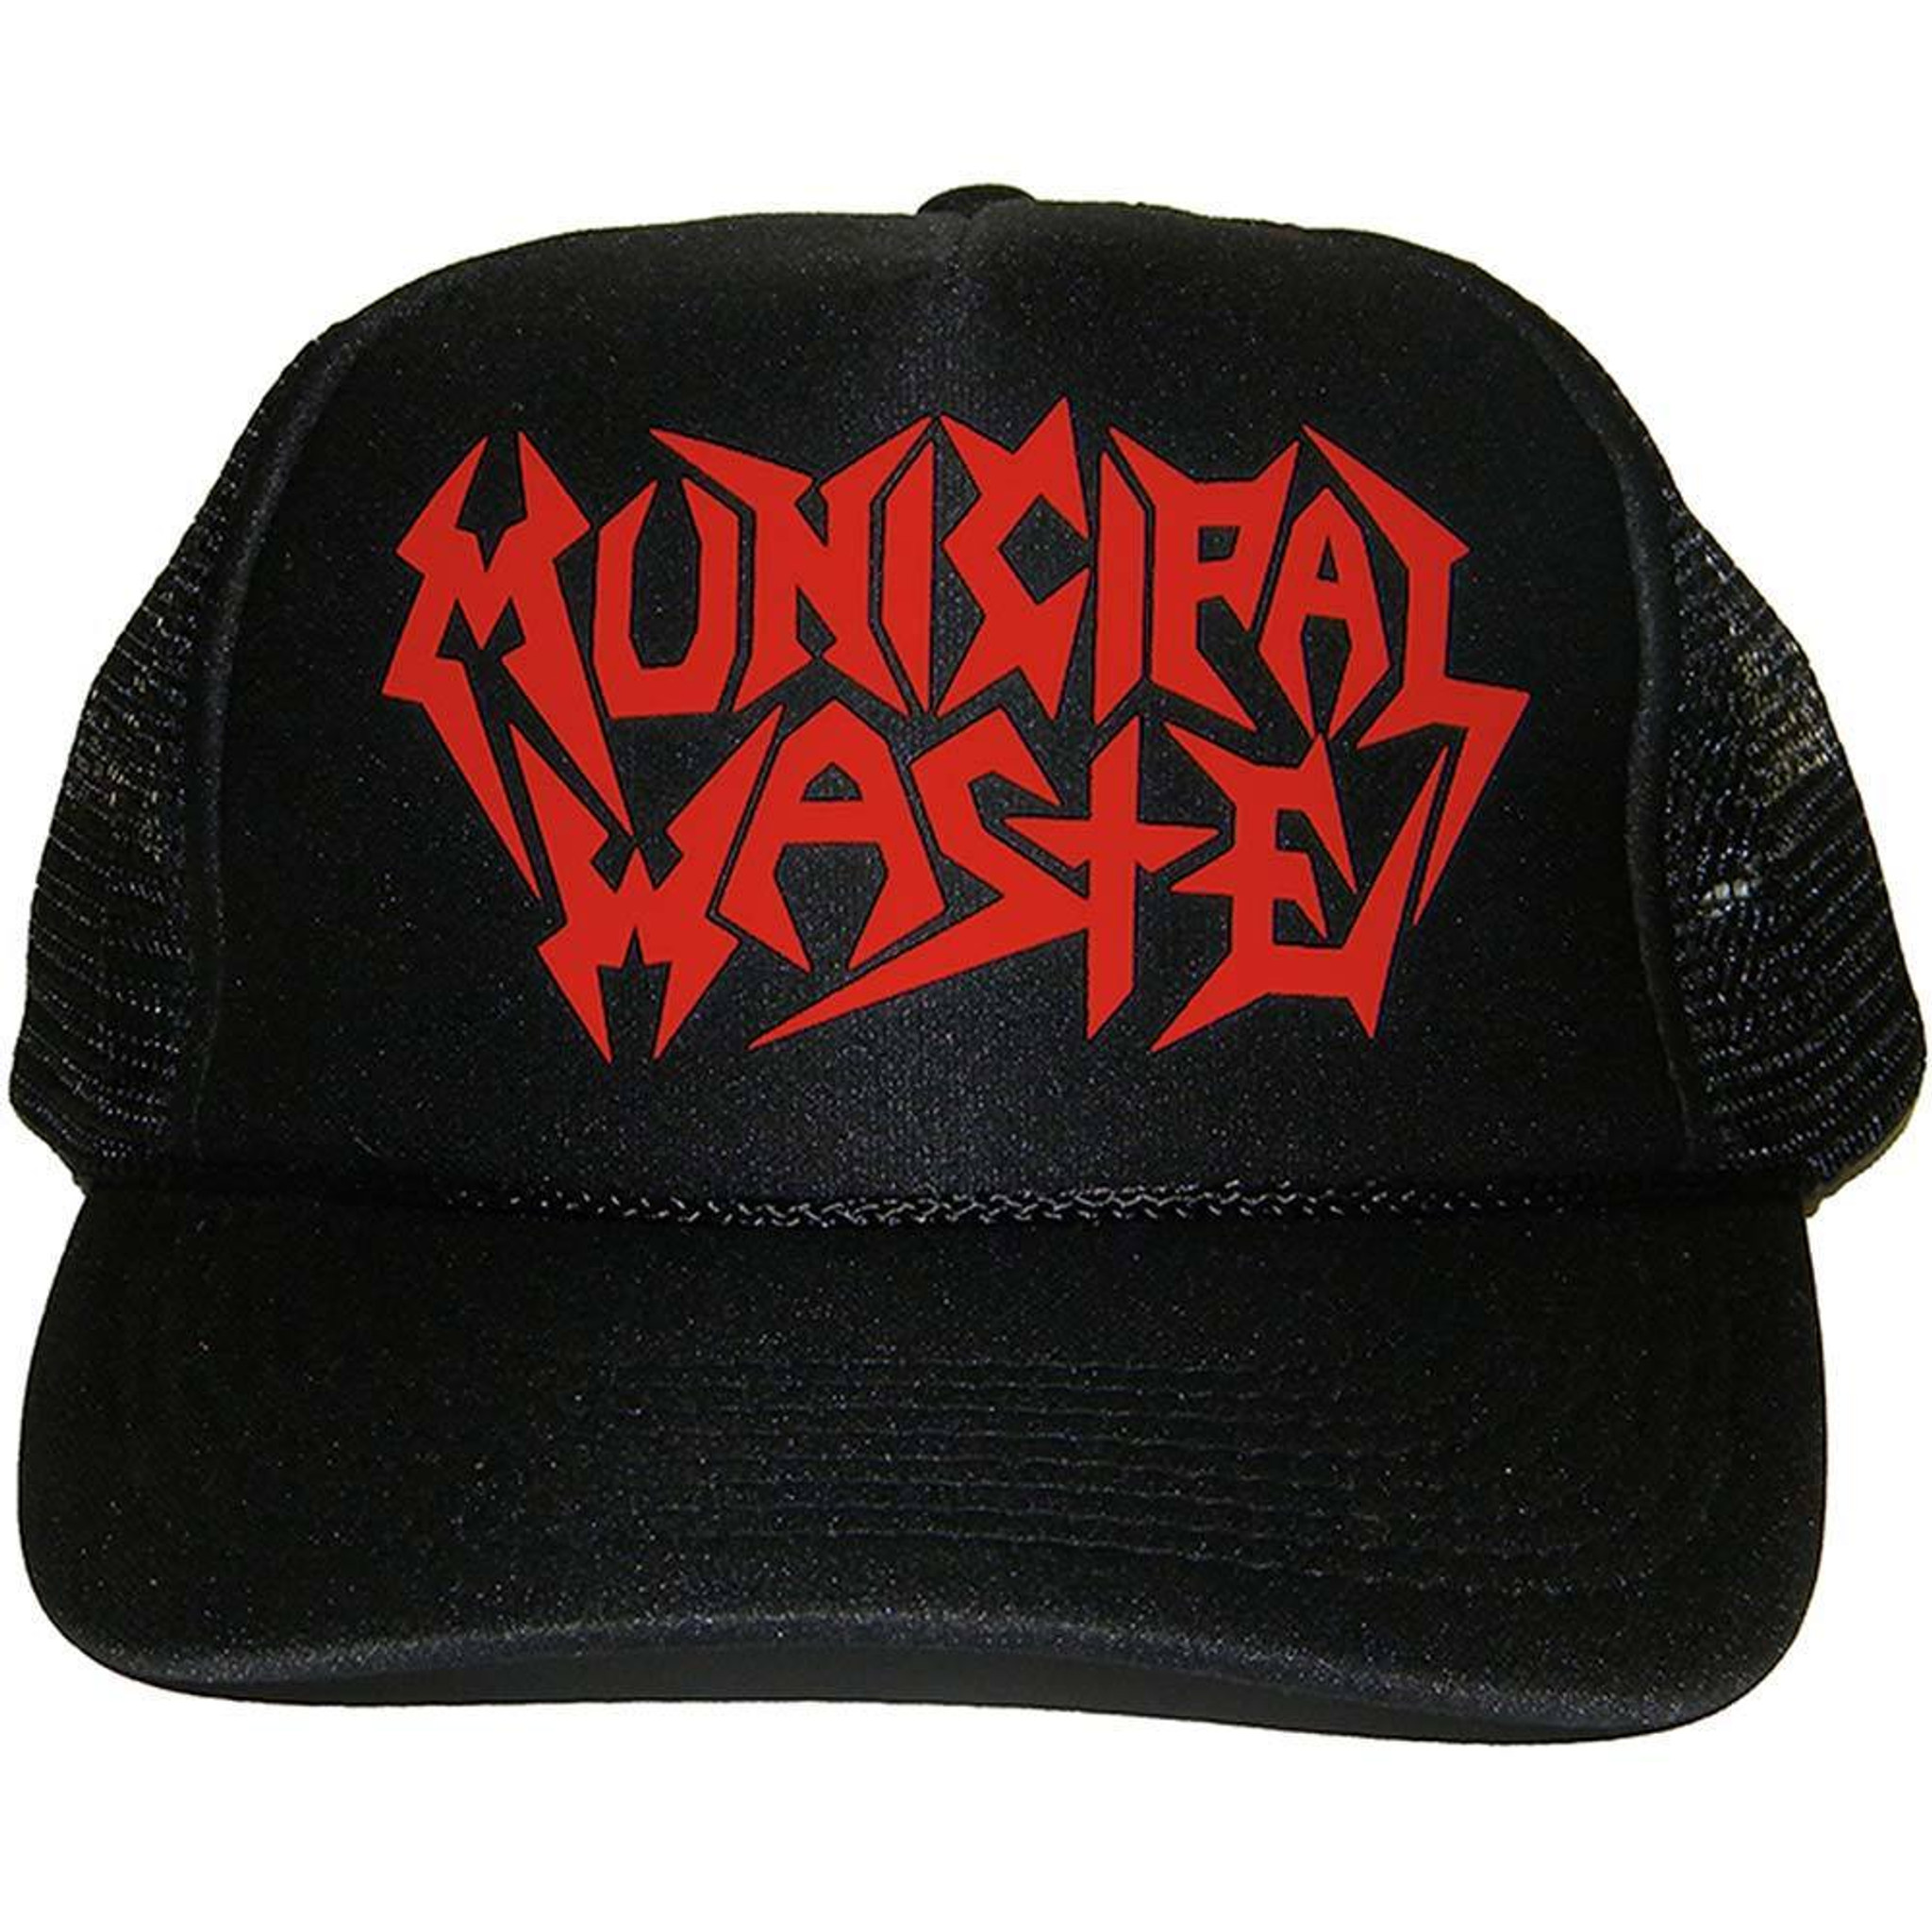 Classic Hat Wasted Trucker Municipal Waste Cap